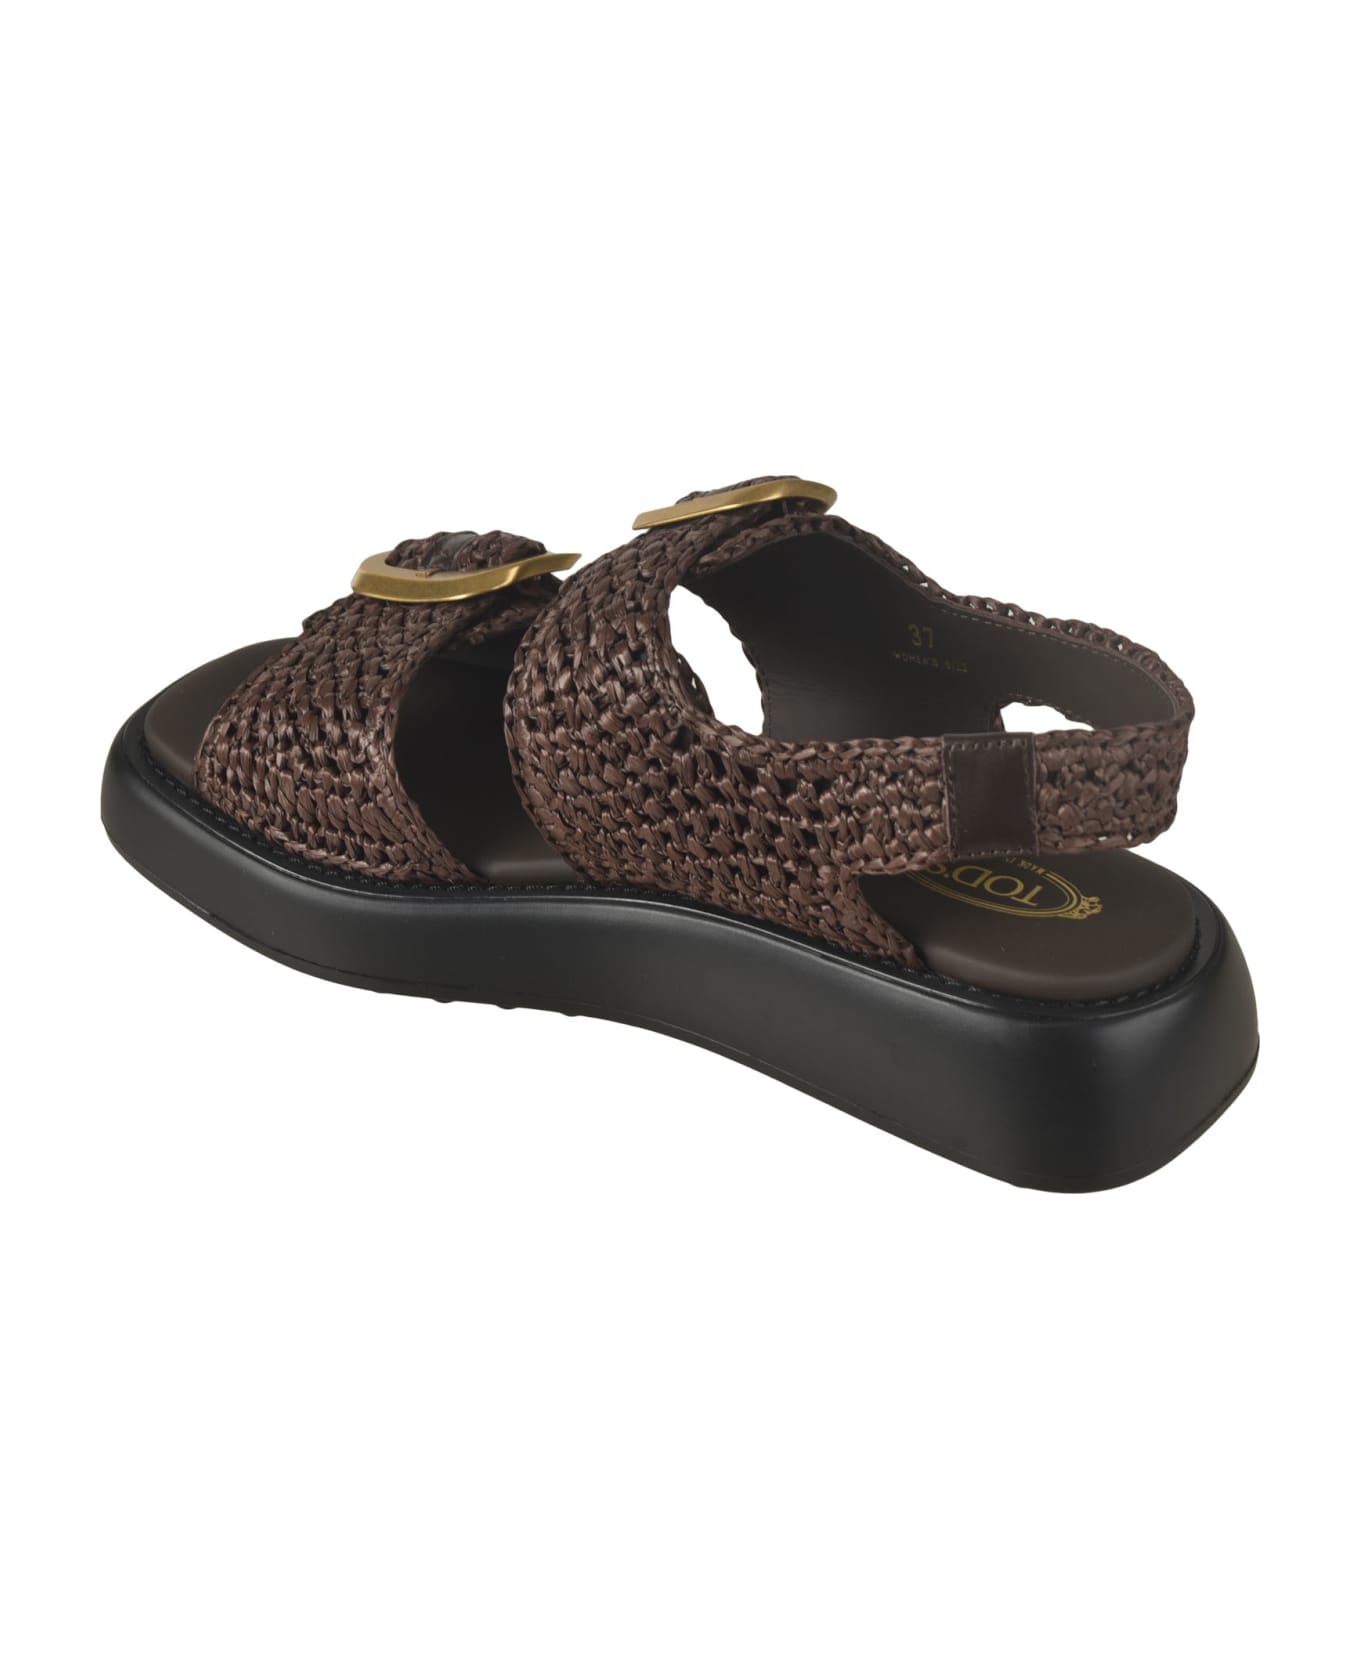 Tod's Doppia Woven Sandals - Chocolate